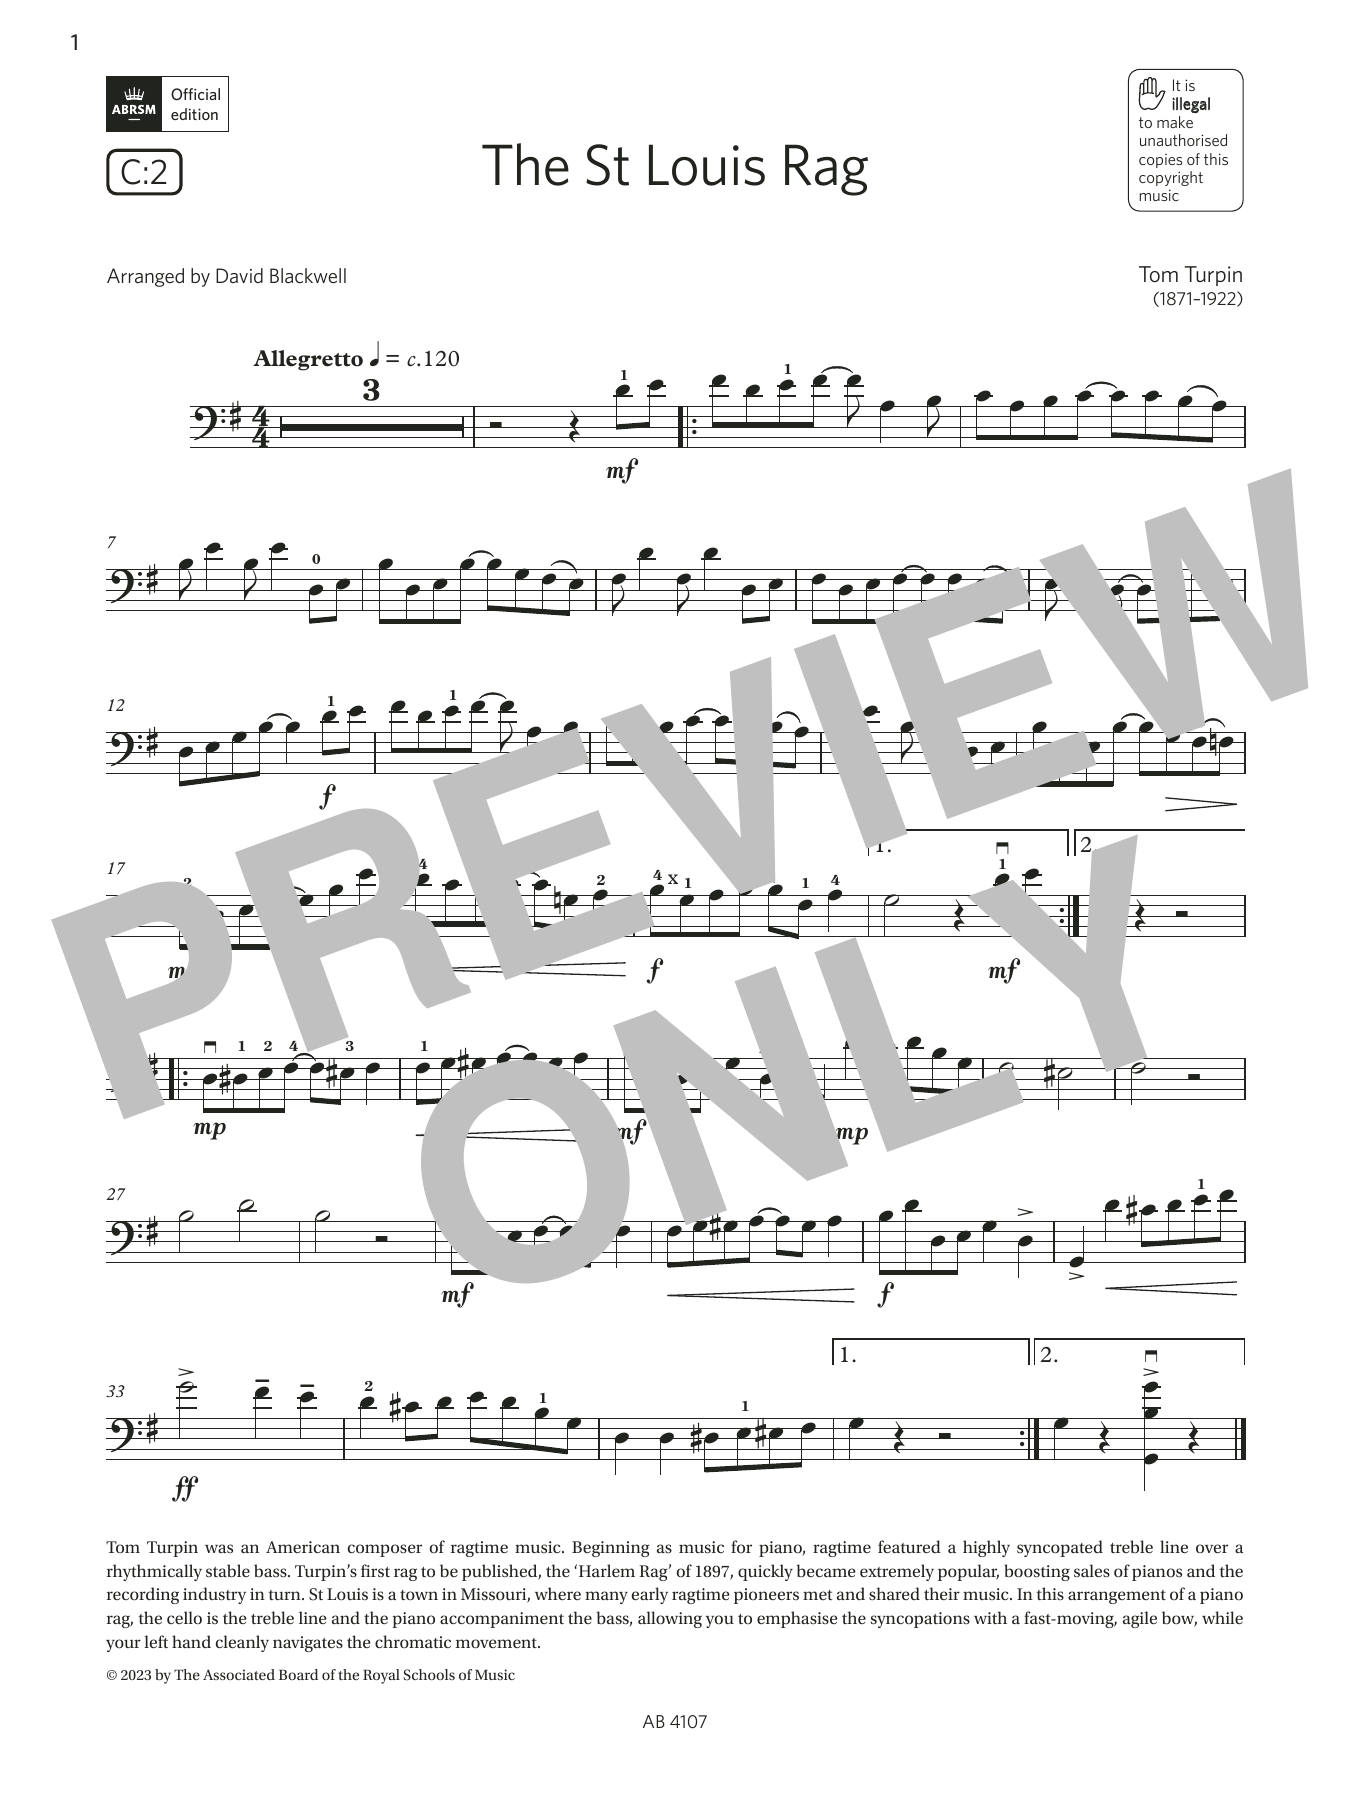 Download Tom Turpin The St Louis Rag (Grade 4, C2, from the Sheet Music